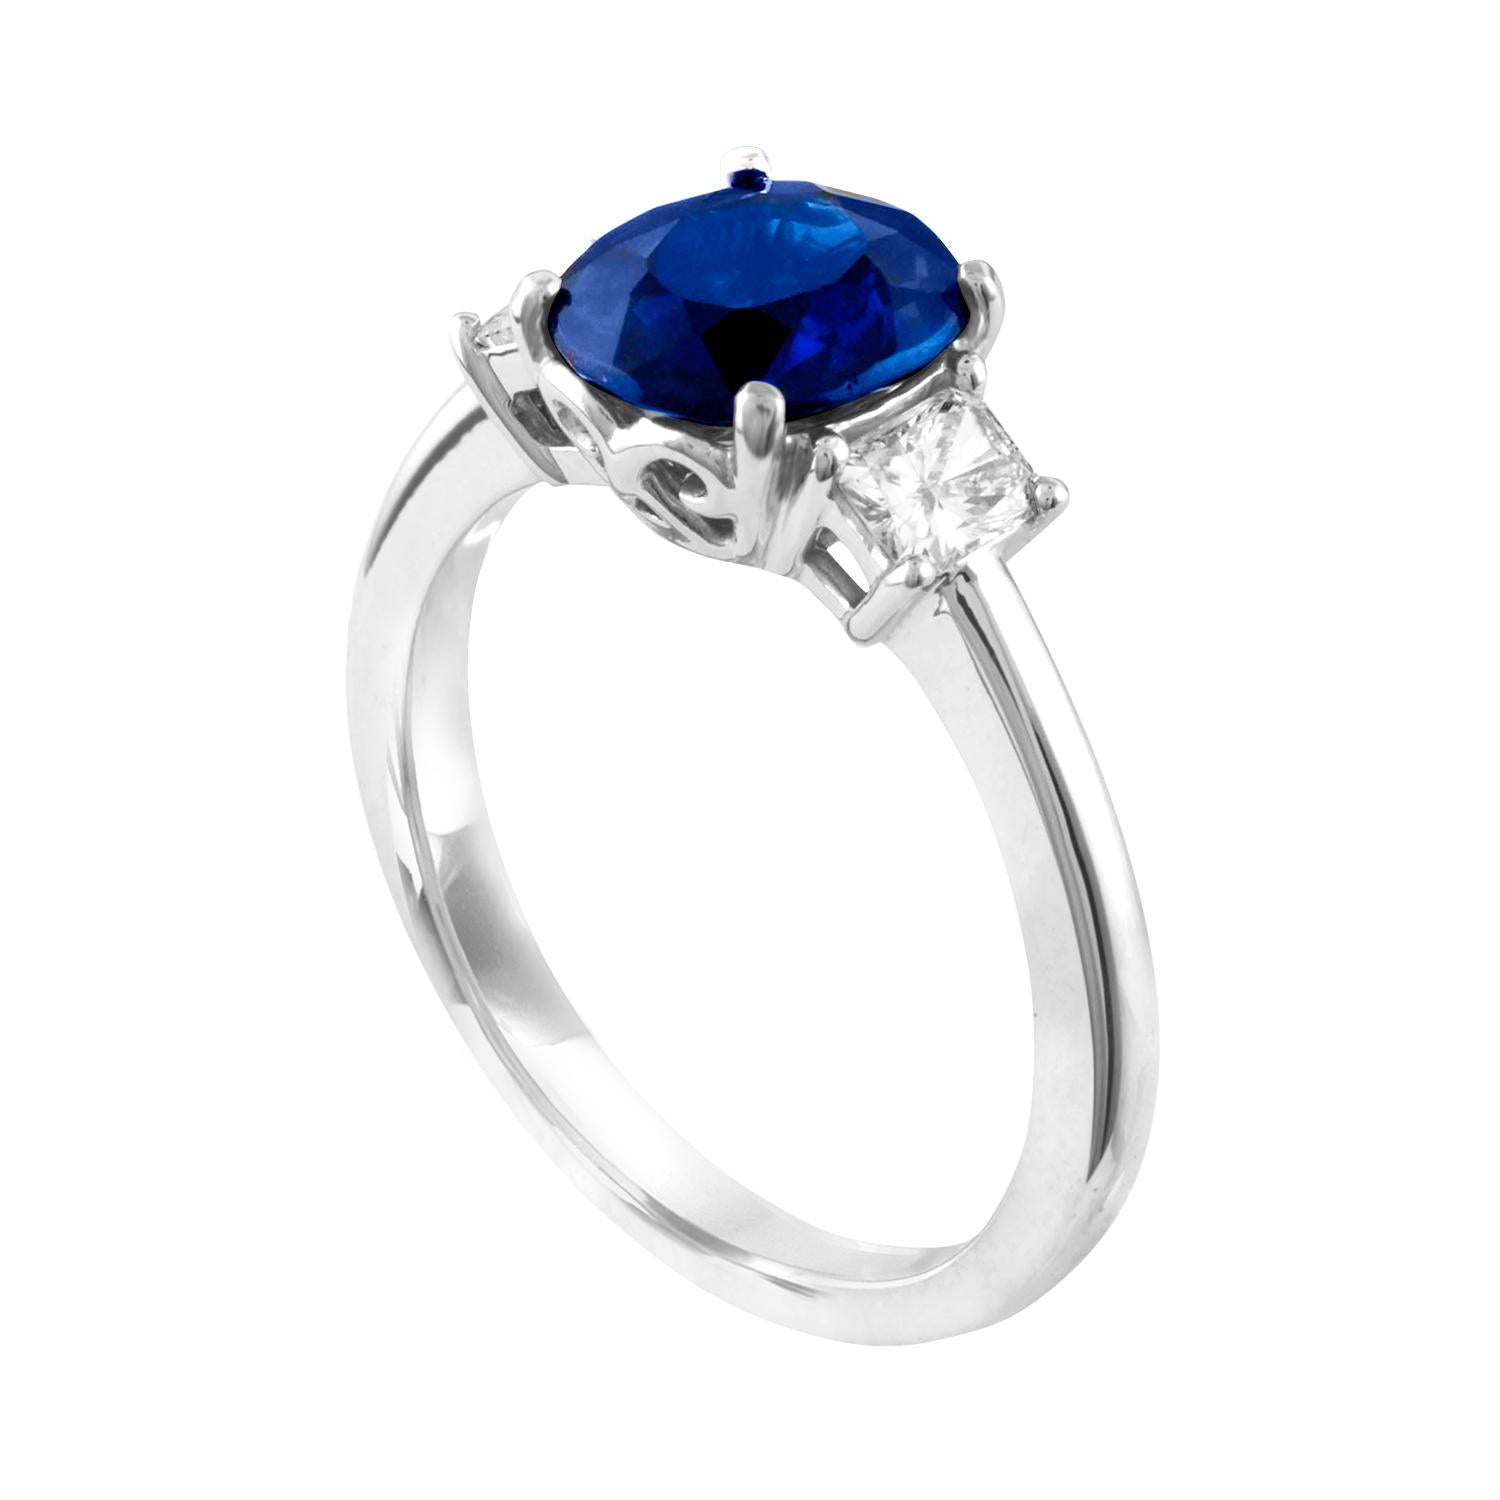 Stunning Three Stone Sapphire and Diamond Ring
The ring is 18K White Gold
The Cushion Blue Sapphire is 2.24 Carats Heated from Australia
The sapphire is GIA certified.
There are 2 Radiant Cut Diamonds 0.41 Carats F VS
The ring is a size 6.75,